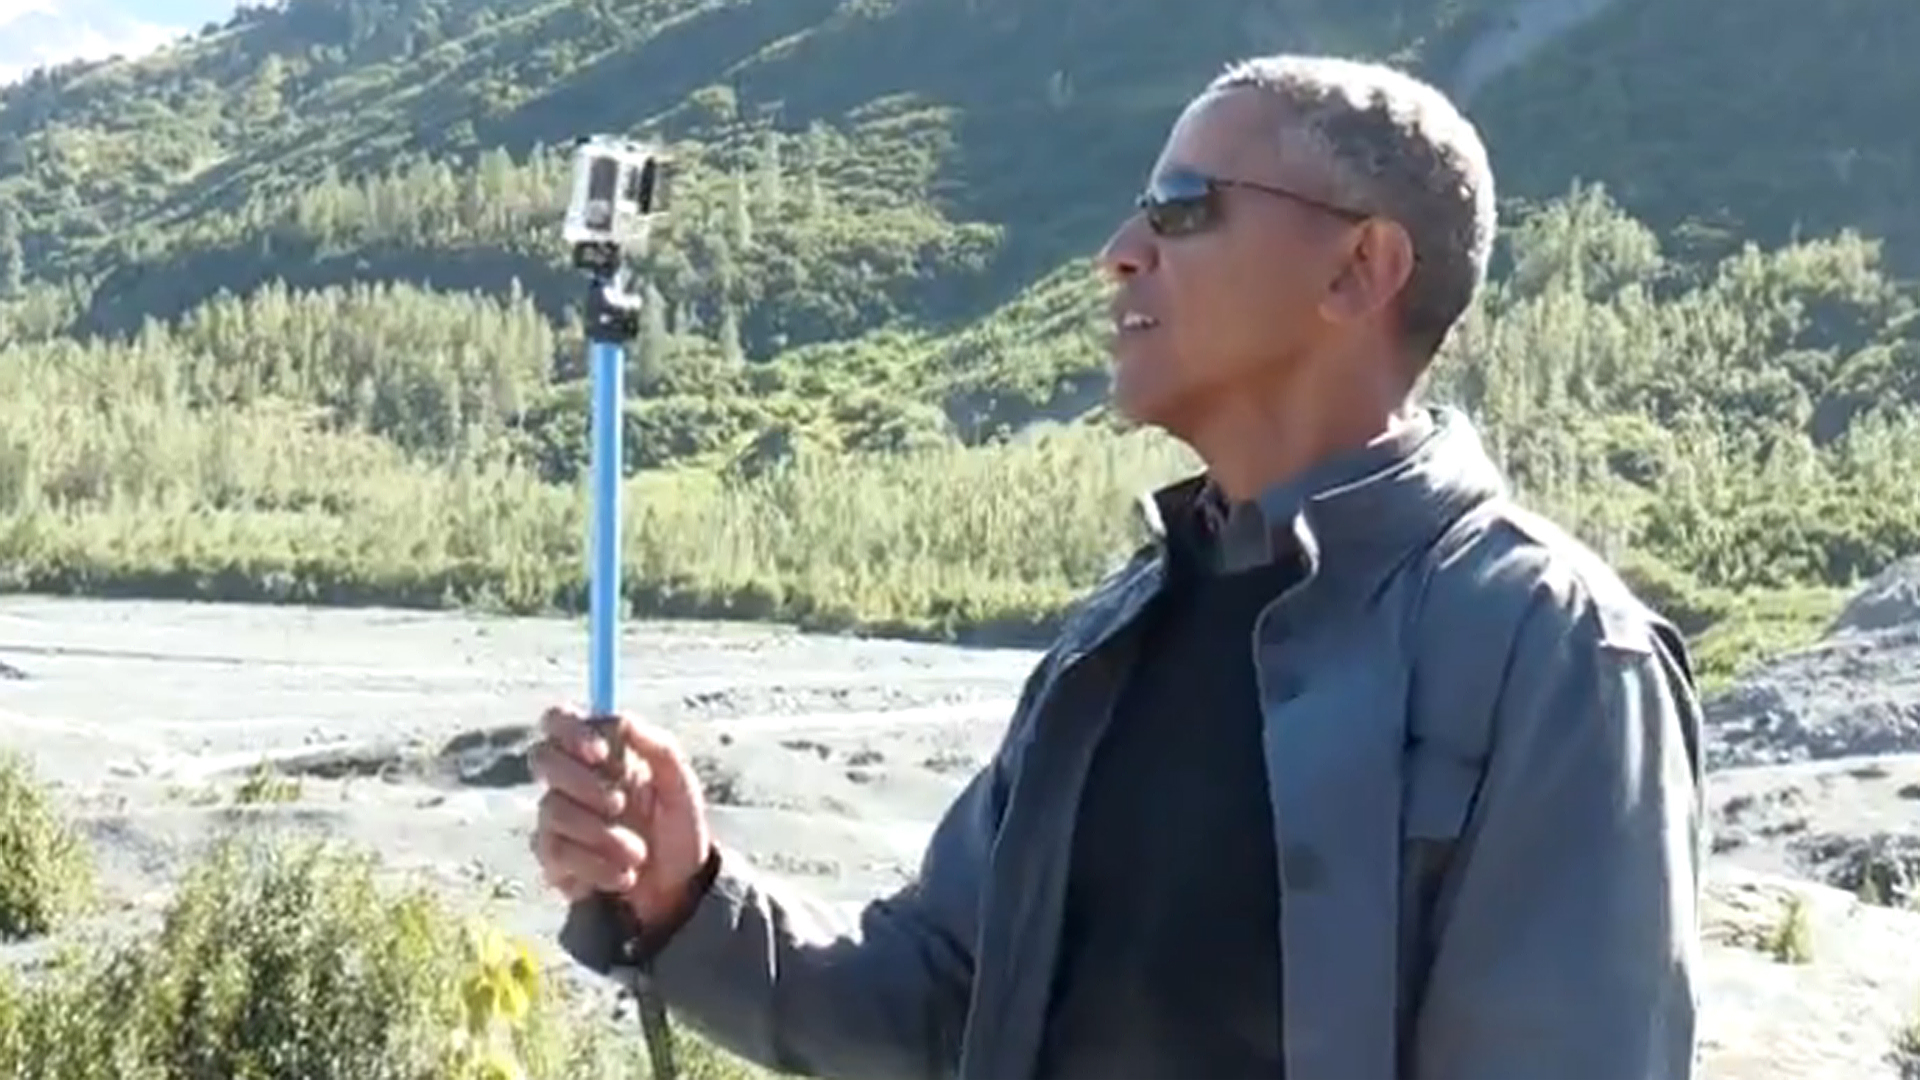 Obama Takes Selfies in Alaska to Share Message of Climate Change